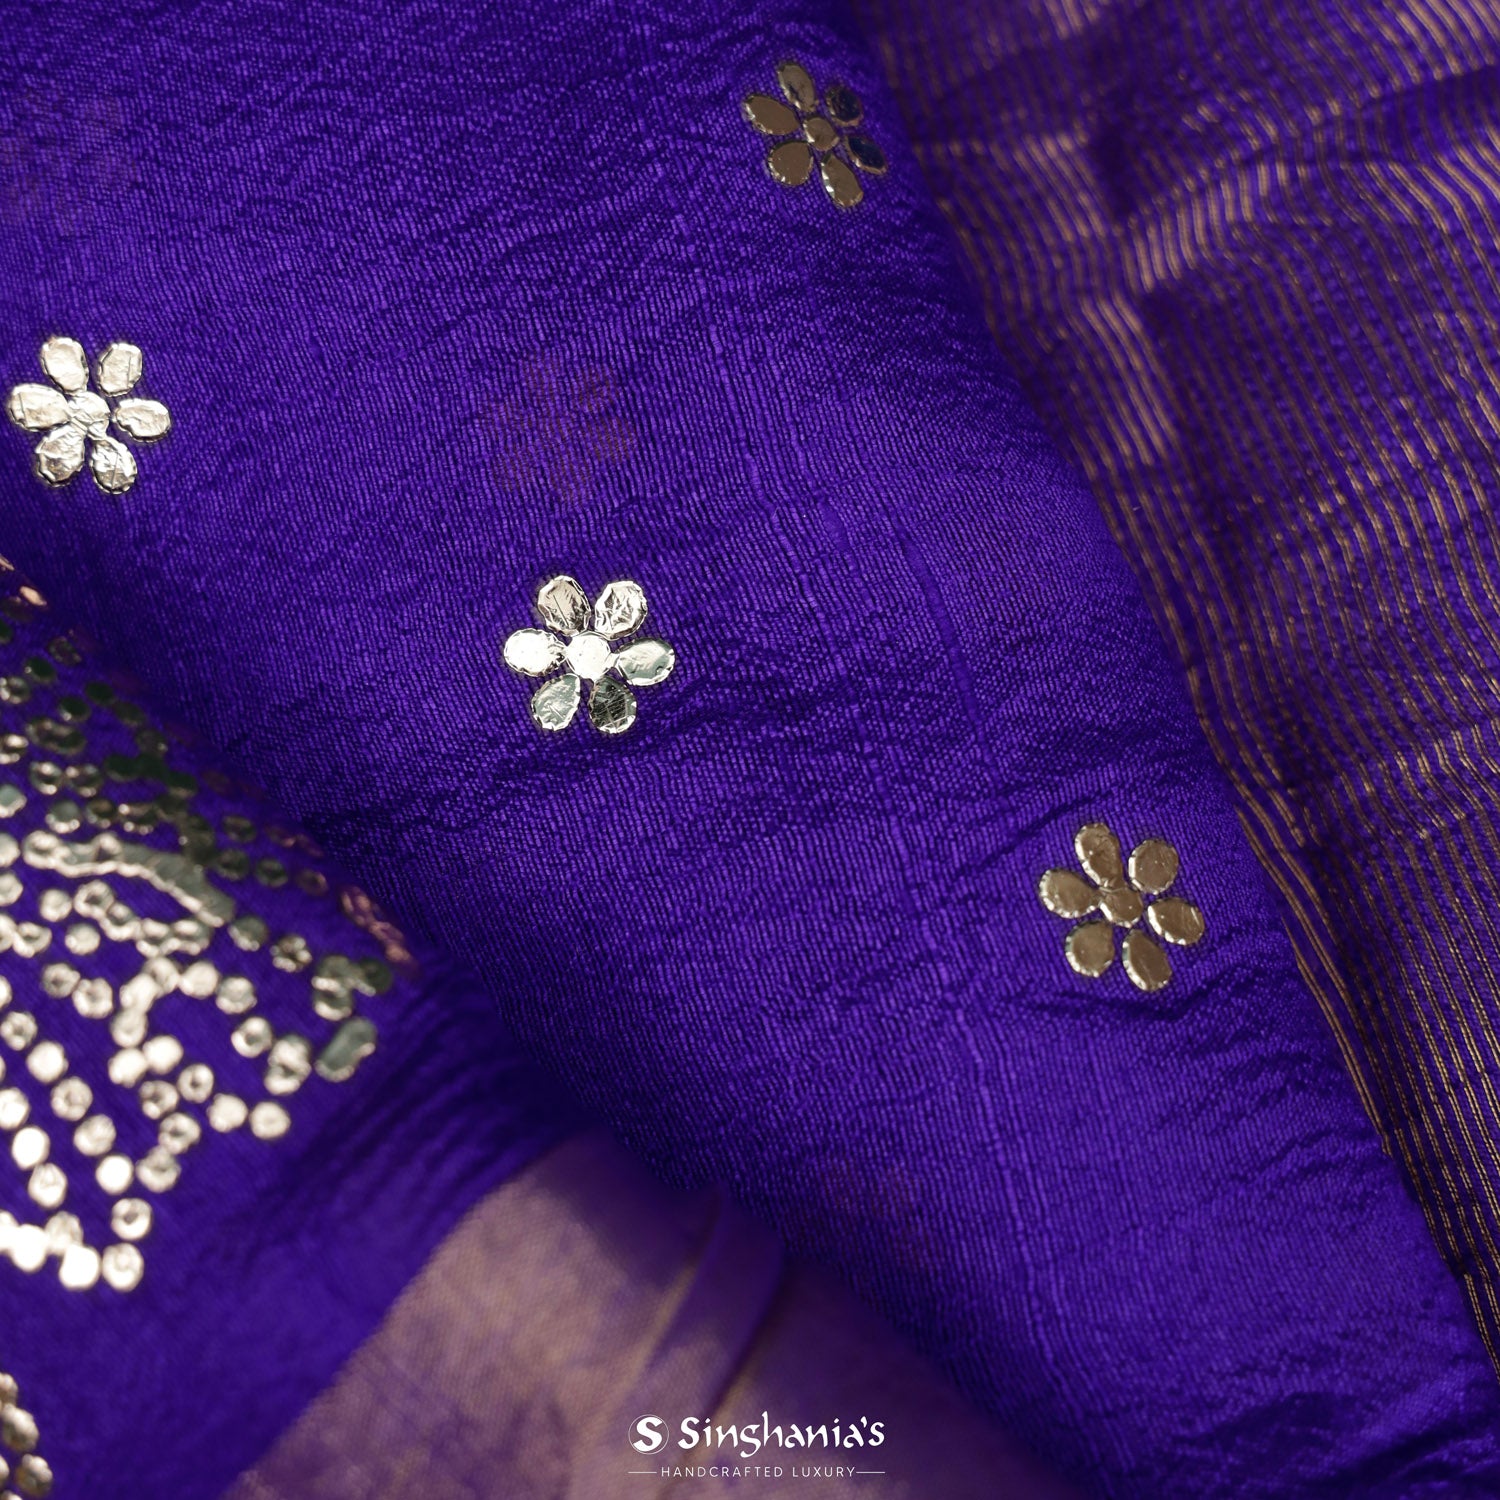 Bluish-Purple Dupion Silk Saree With Mukaish Work In Floral Buttis And Peacock Pattern